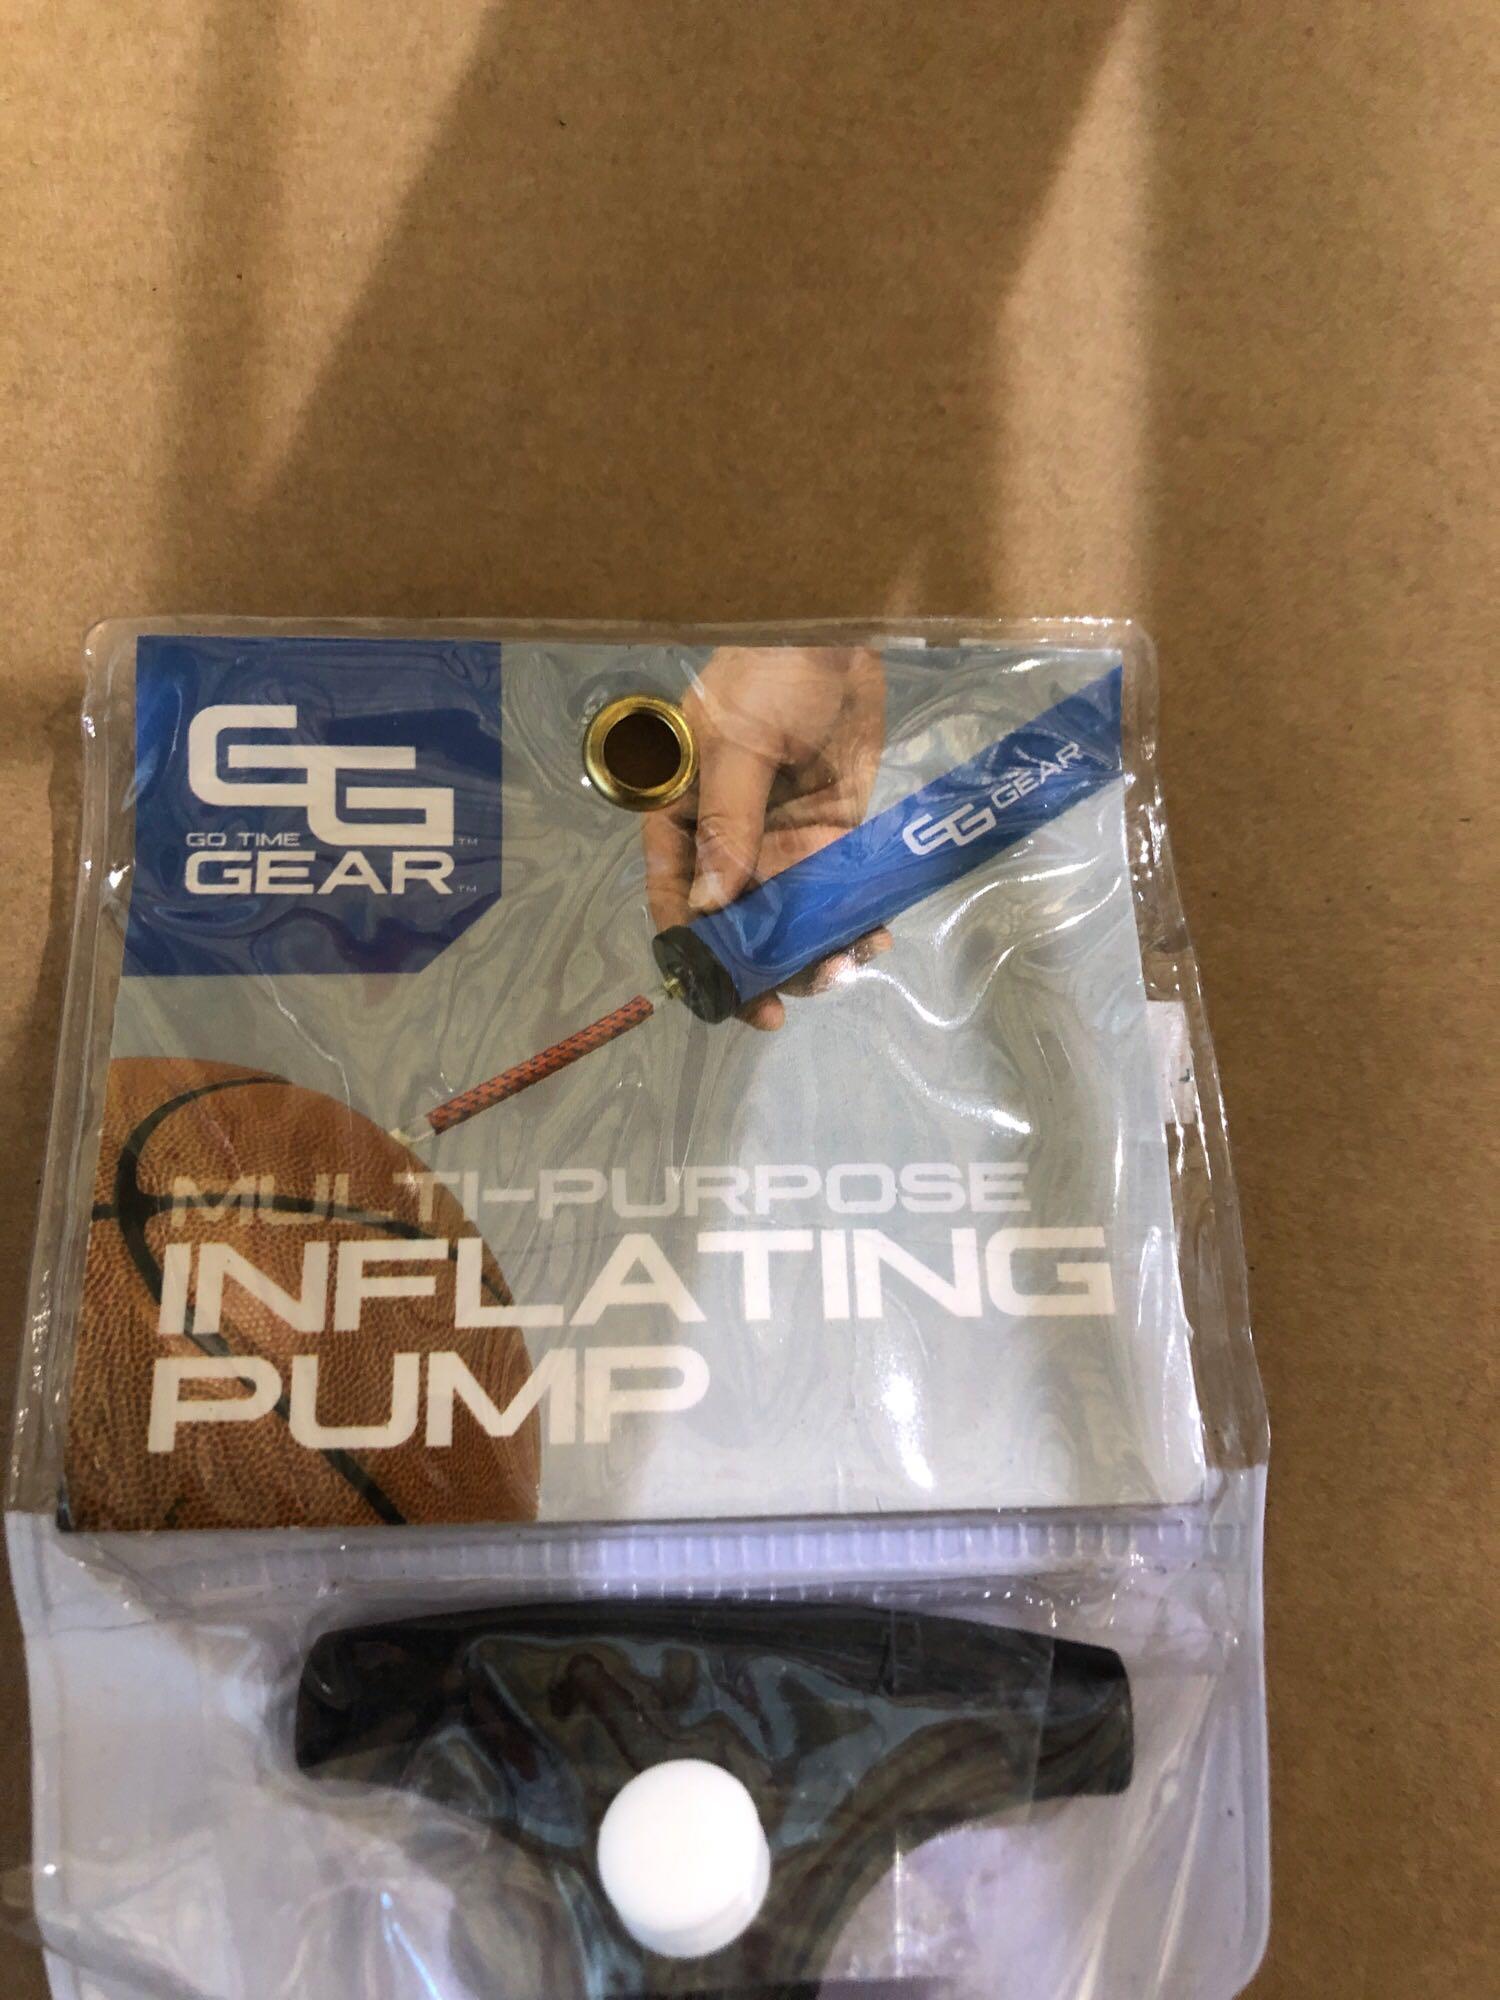 Go Time Gear Inflating Ball Pump, $7.99